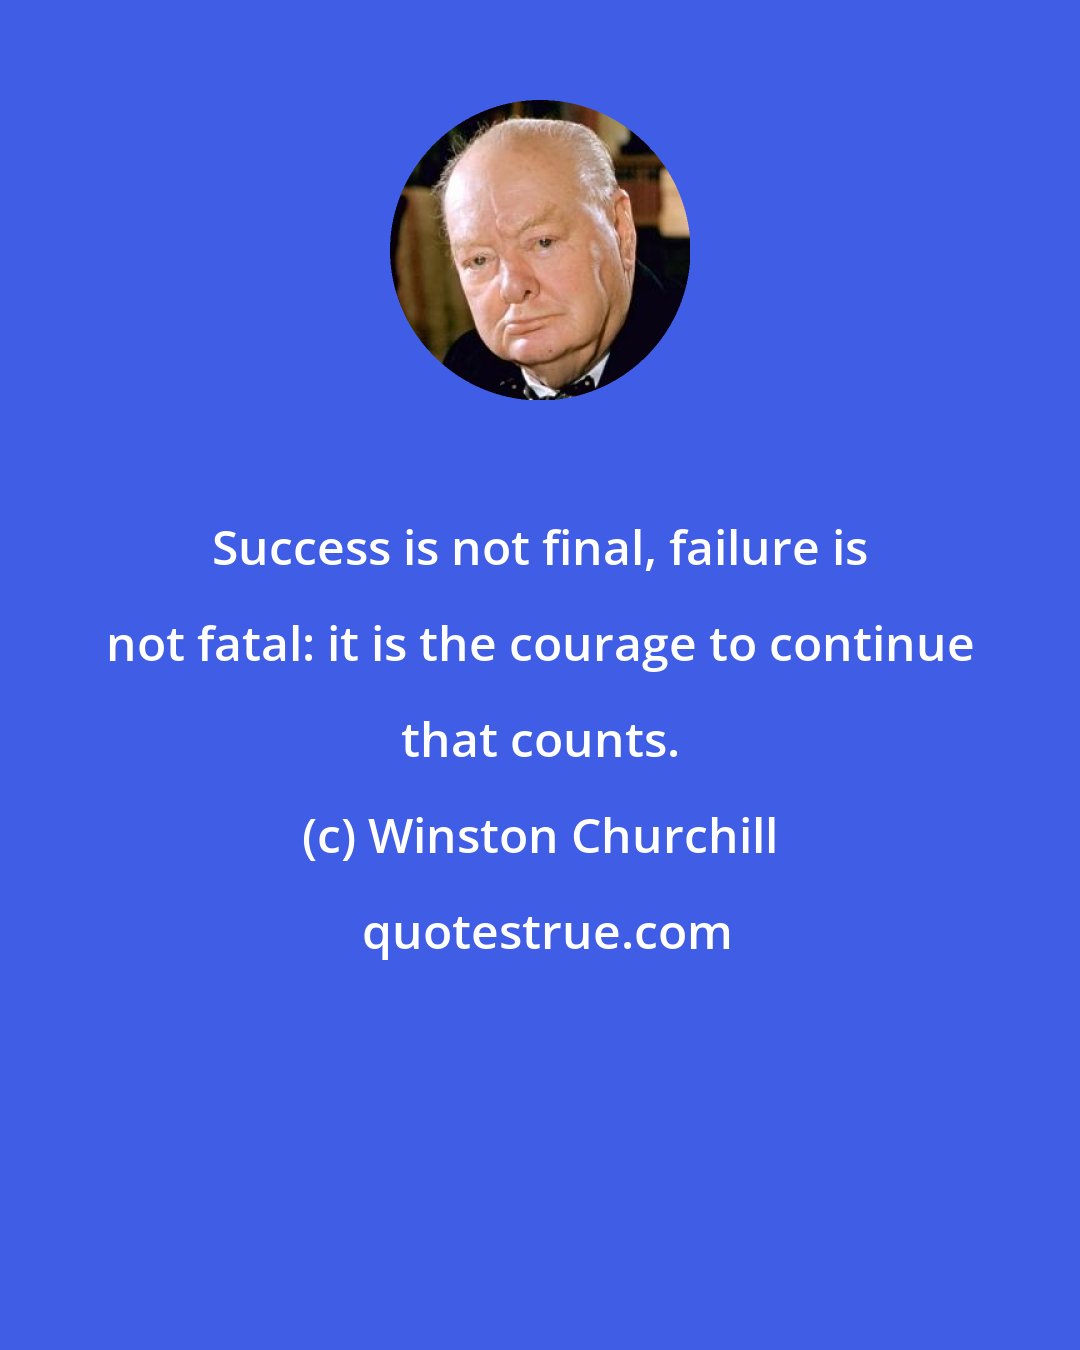 Winston Churchill: Success is not final, failure is not fatal: it is the courage to continue that counts.